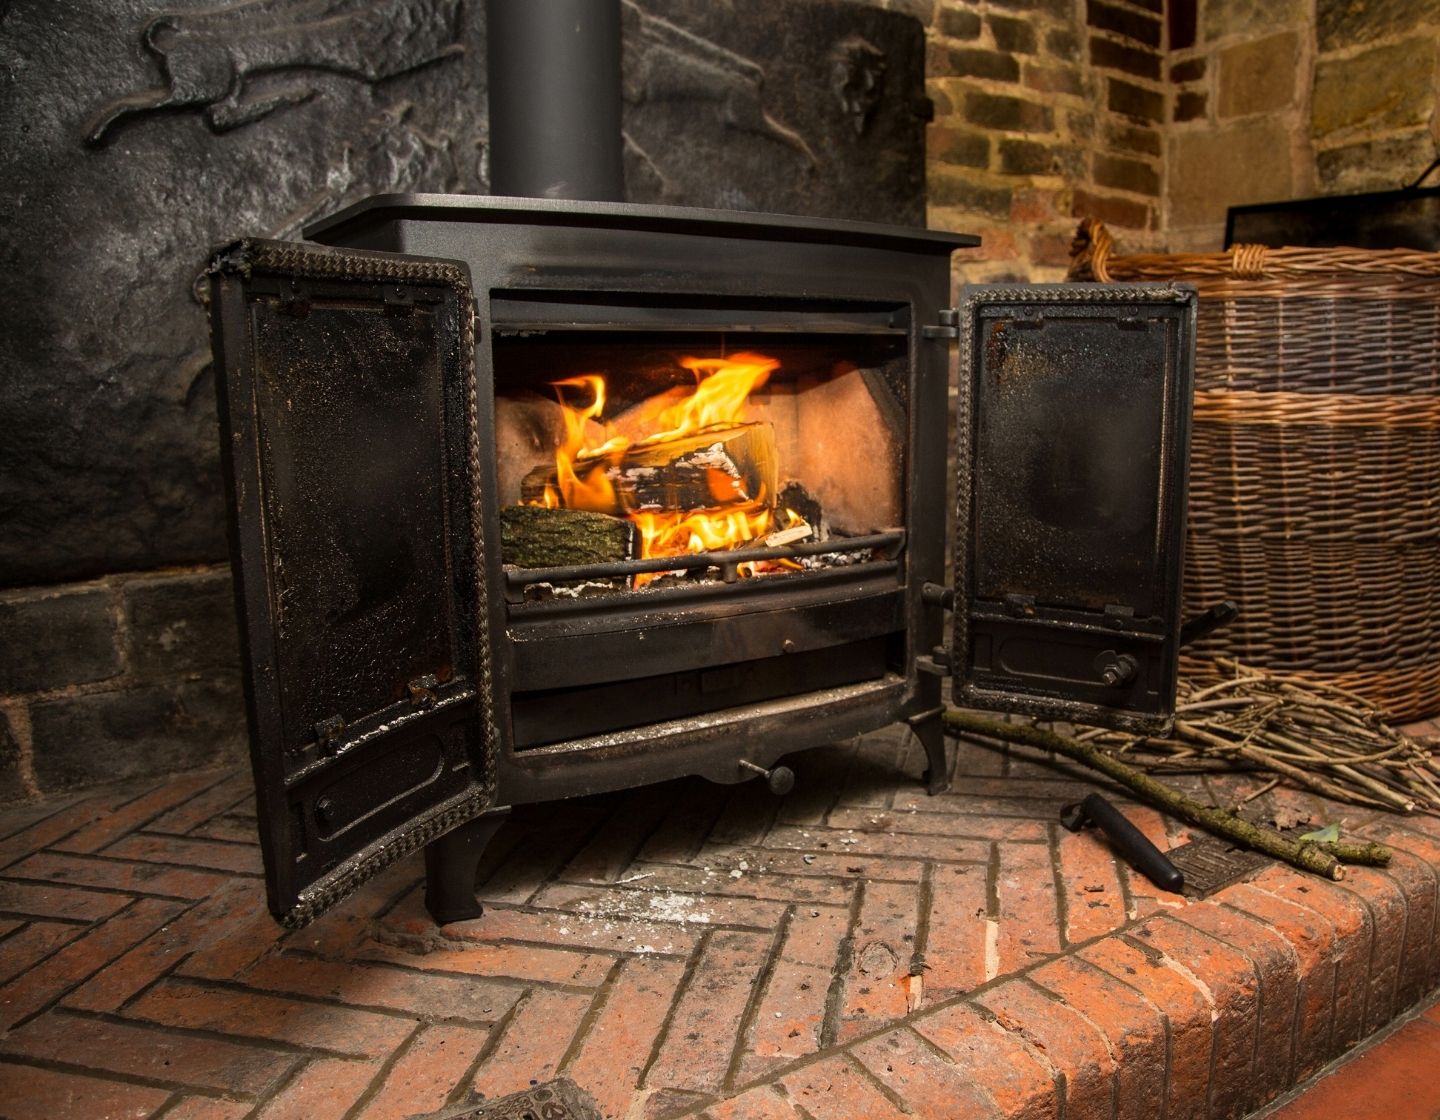 Are wood burning stoves bad for the environment?